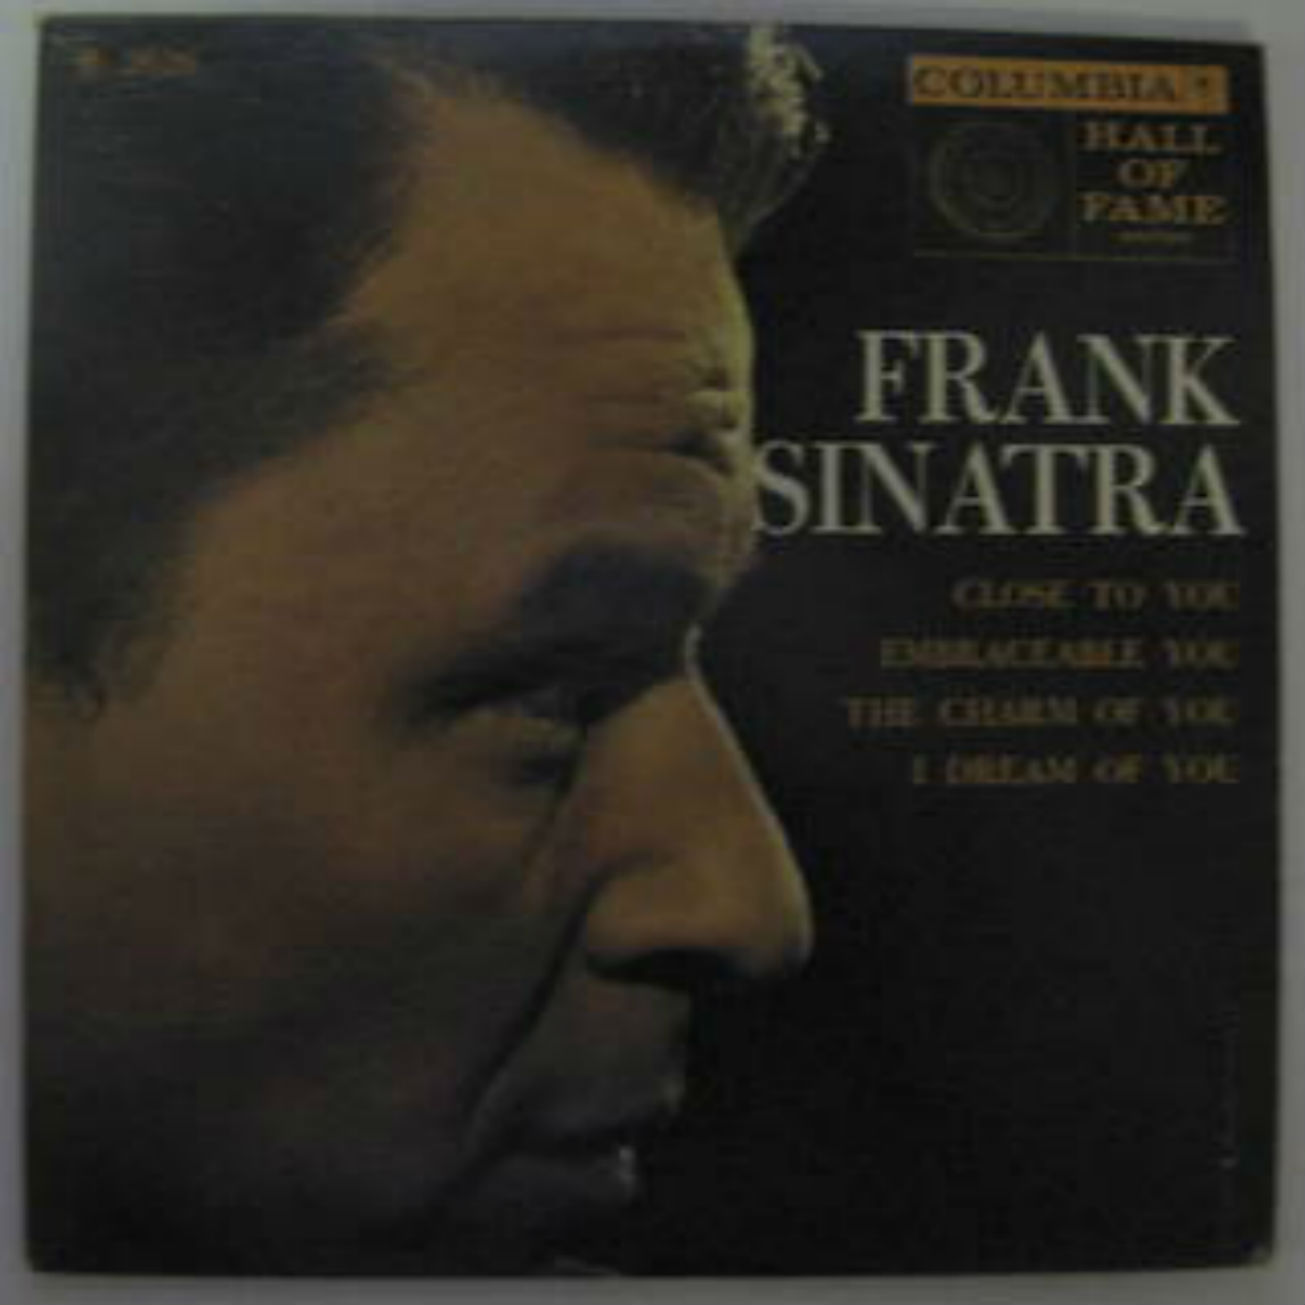 Frank Sinatra / Close To You EP Parts 3 and 4